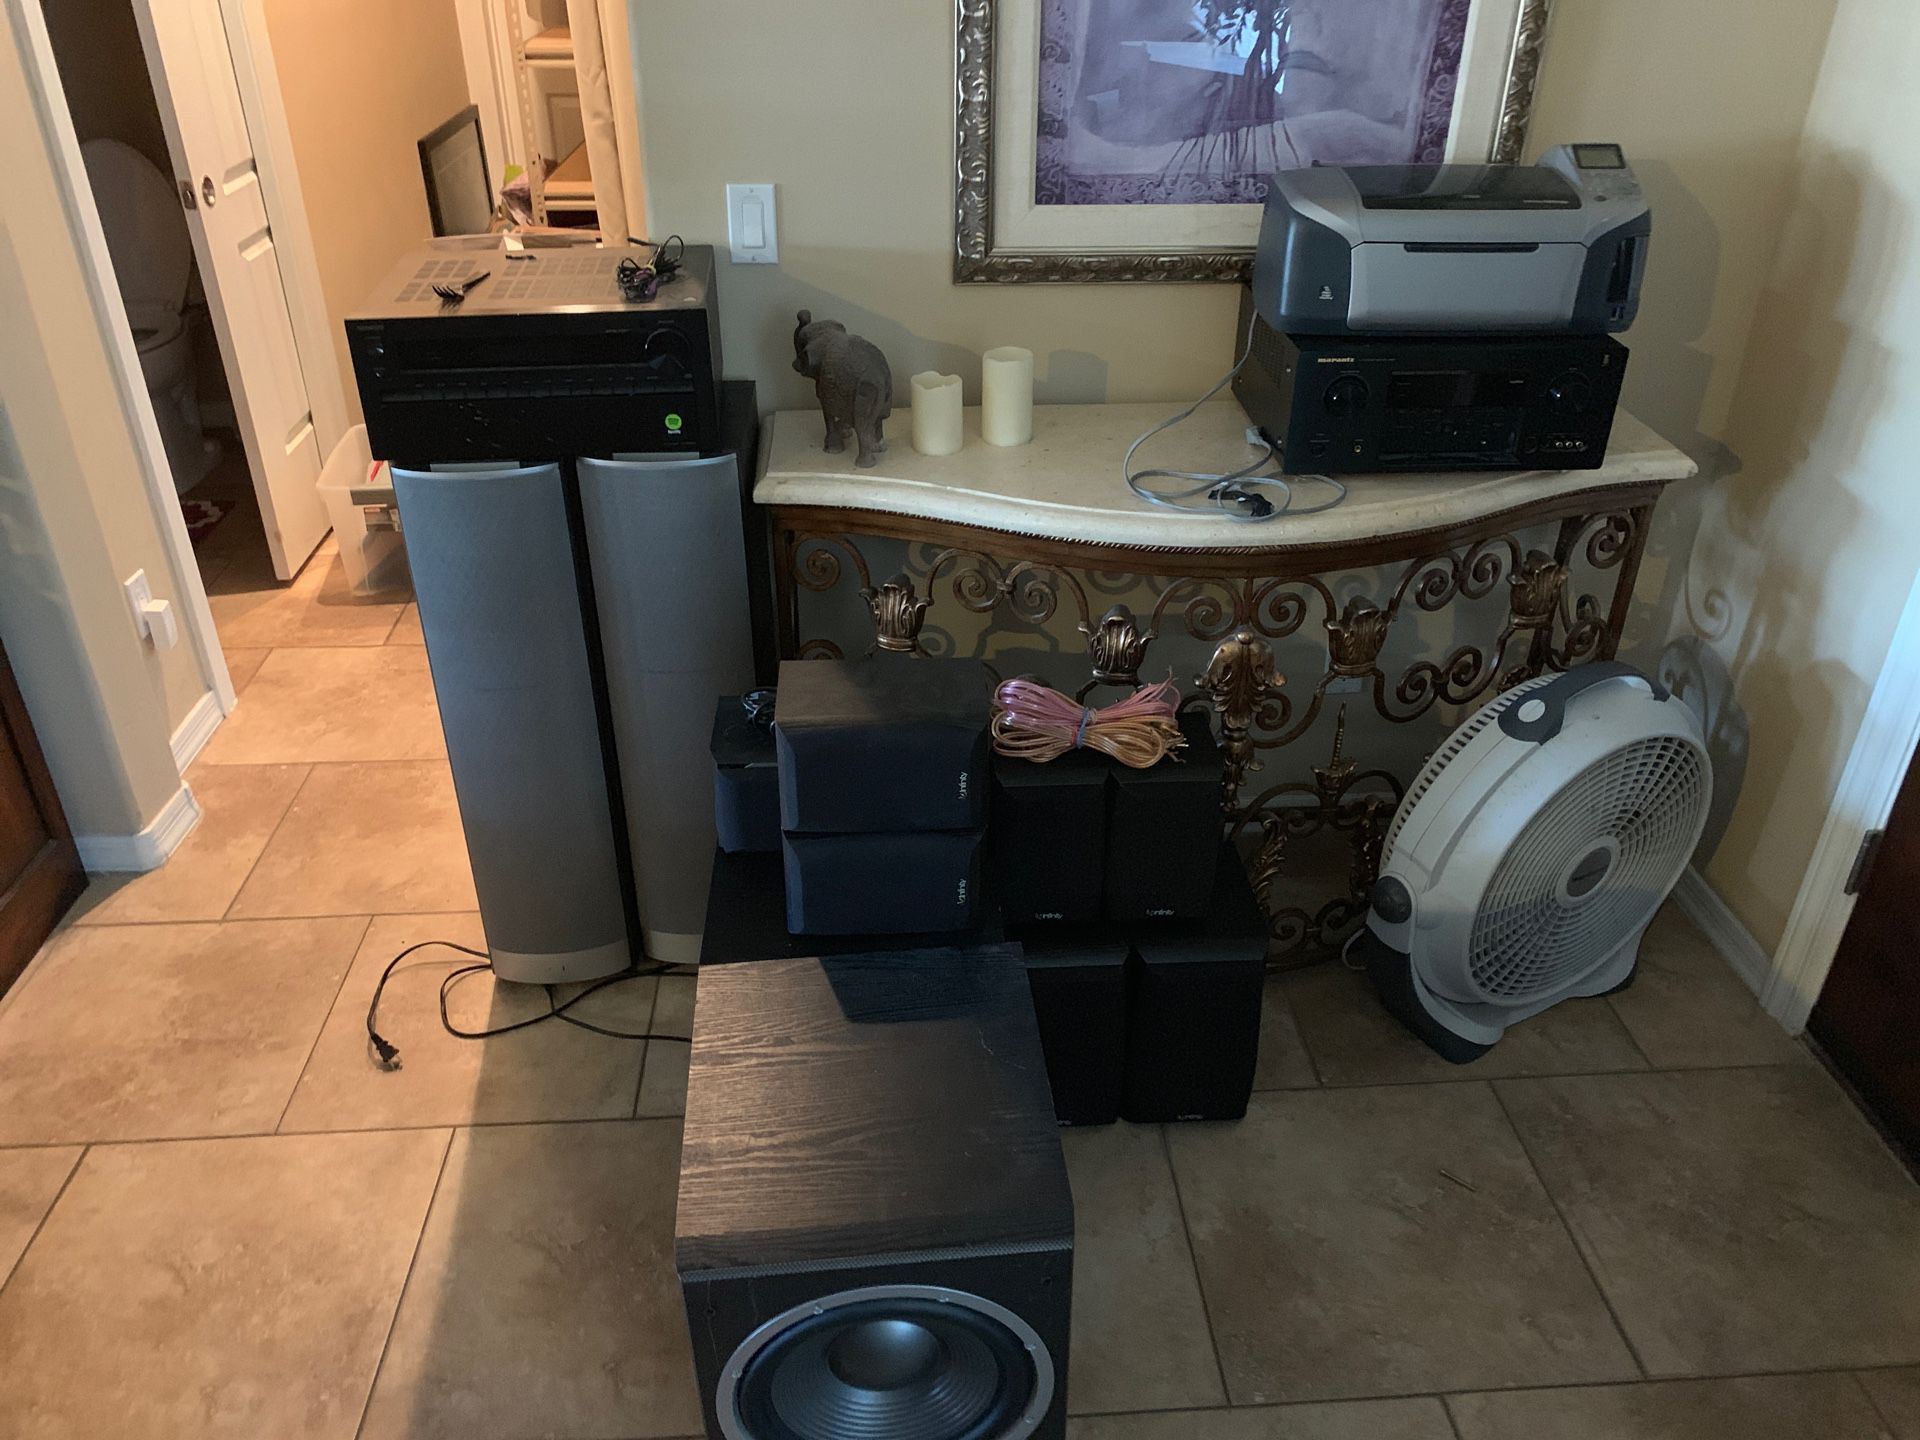 Full Home Theatre System (2 JBL Venue Series, 4 Infinity Surrounds, 2 Infinity R & L, Infinity Center, JBL Venue Subwoofer, Infinity Subwoofer, Onkyo